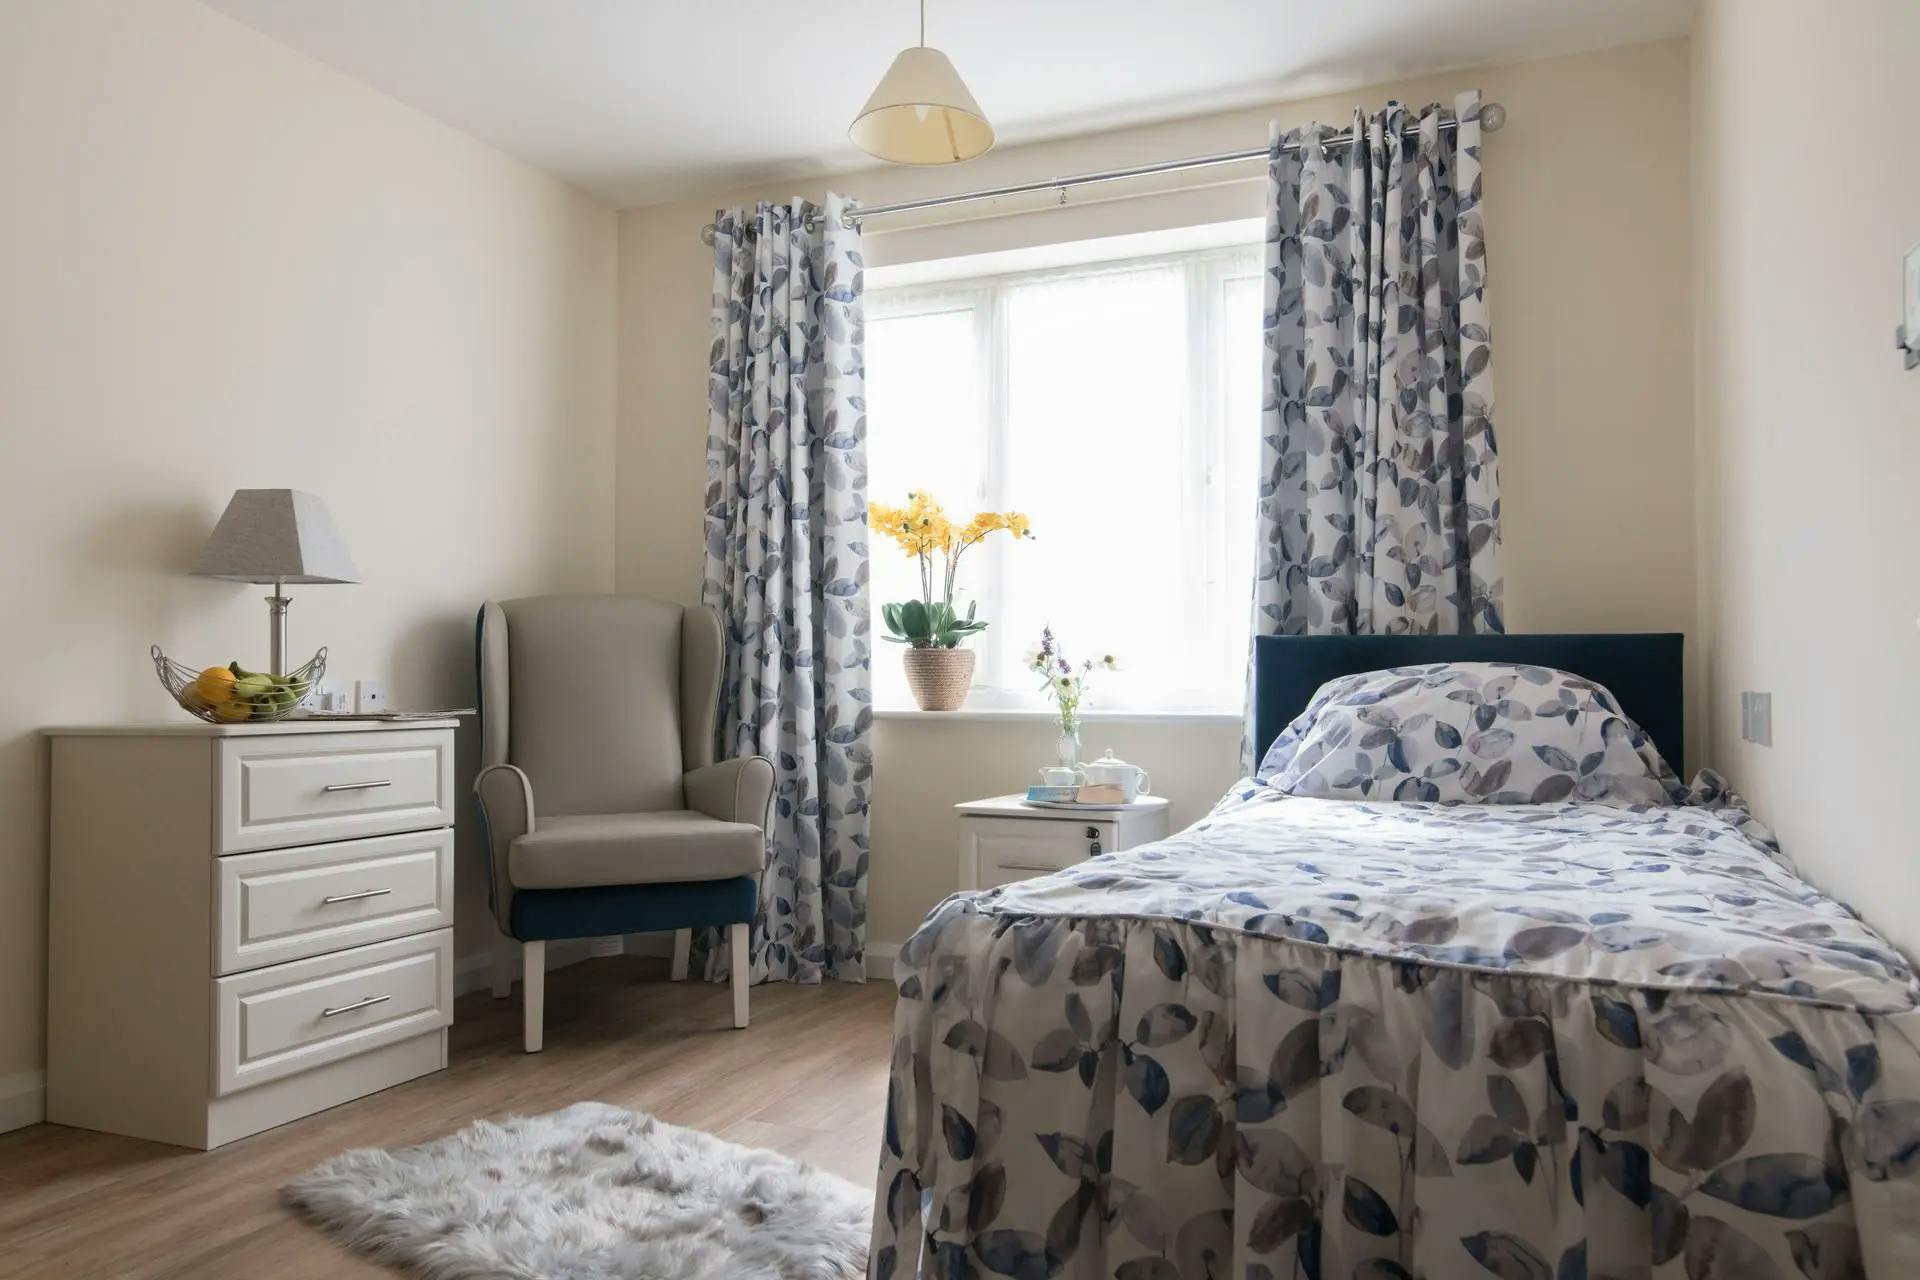 Bedroom at Gilawood Court Care Home in Nuneaton, Warwickshire